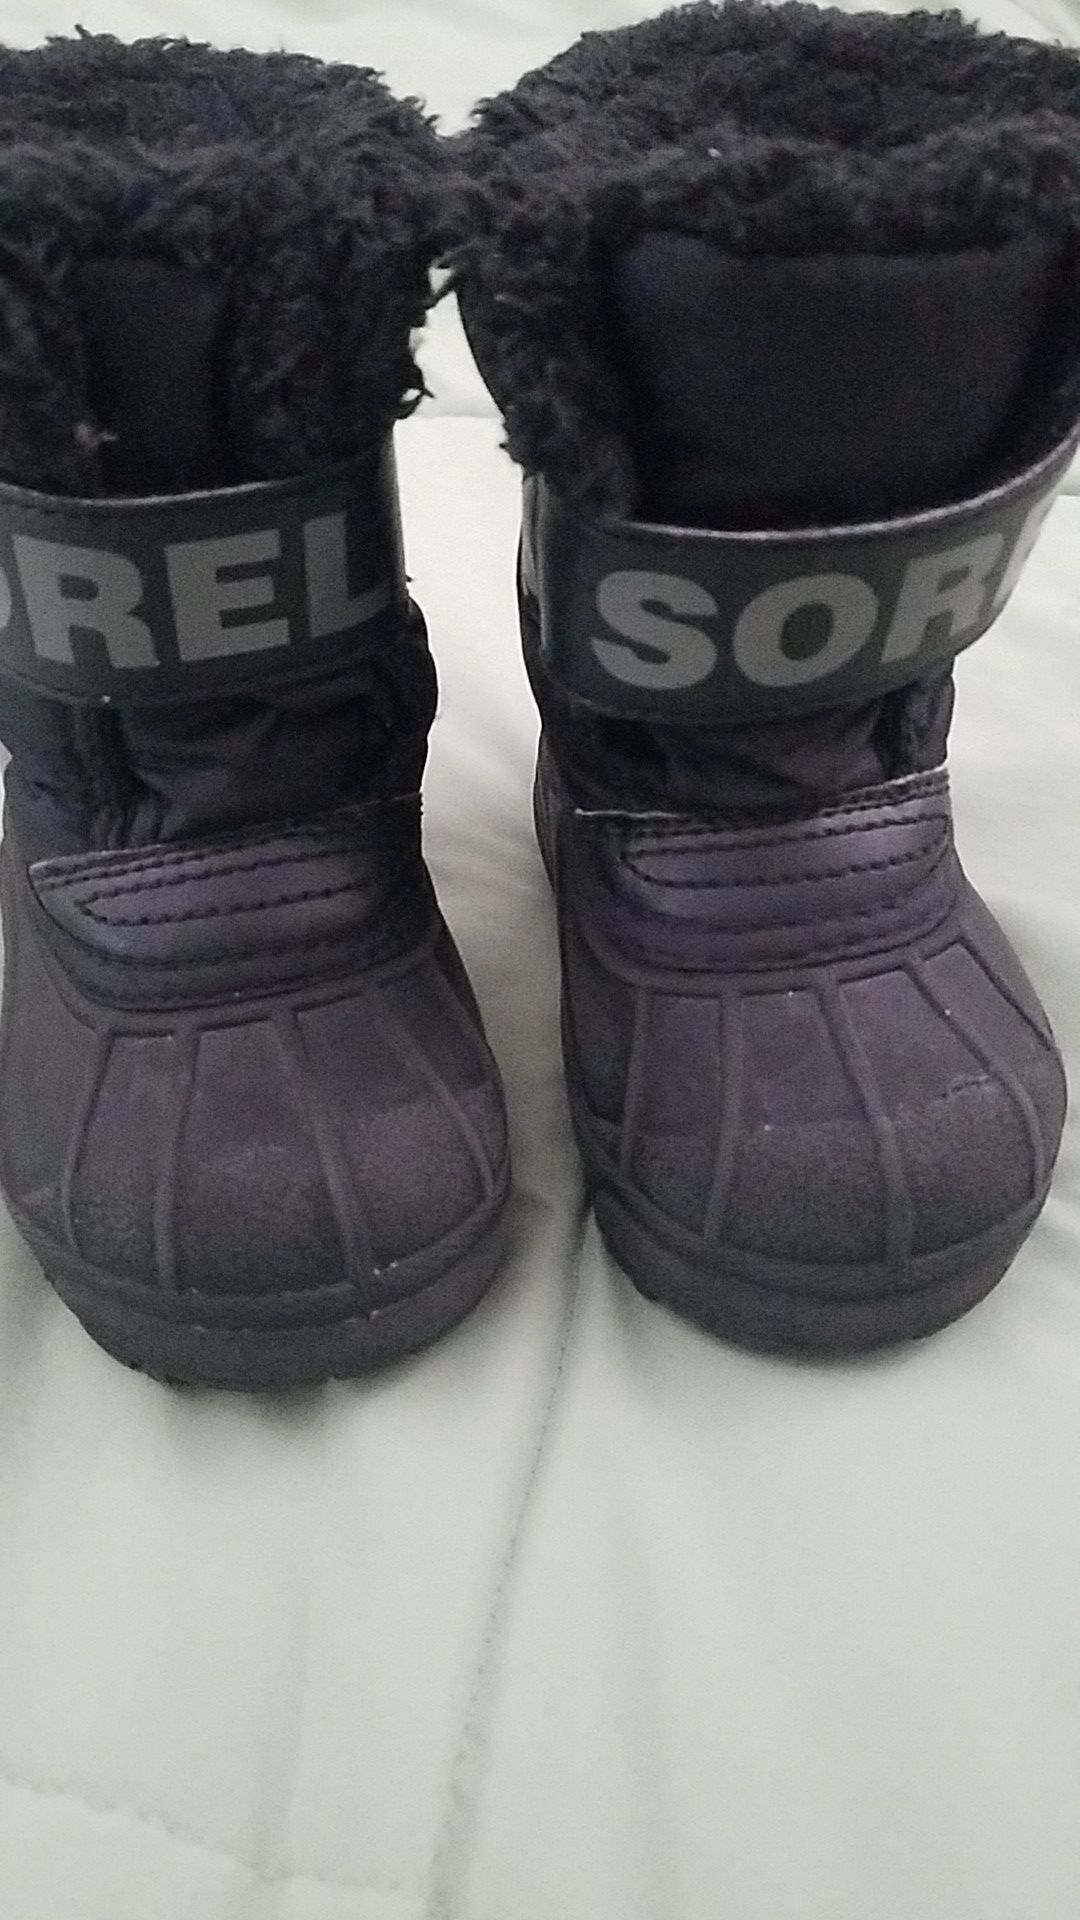 Sorel fur snow toddler boots size 5. Pick Up only.